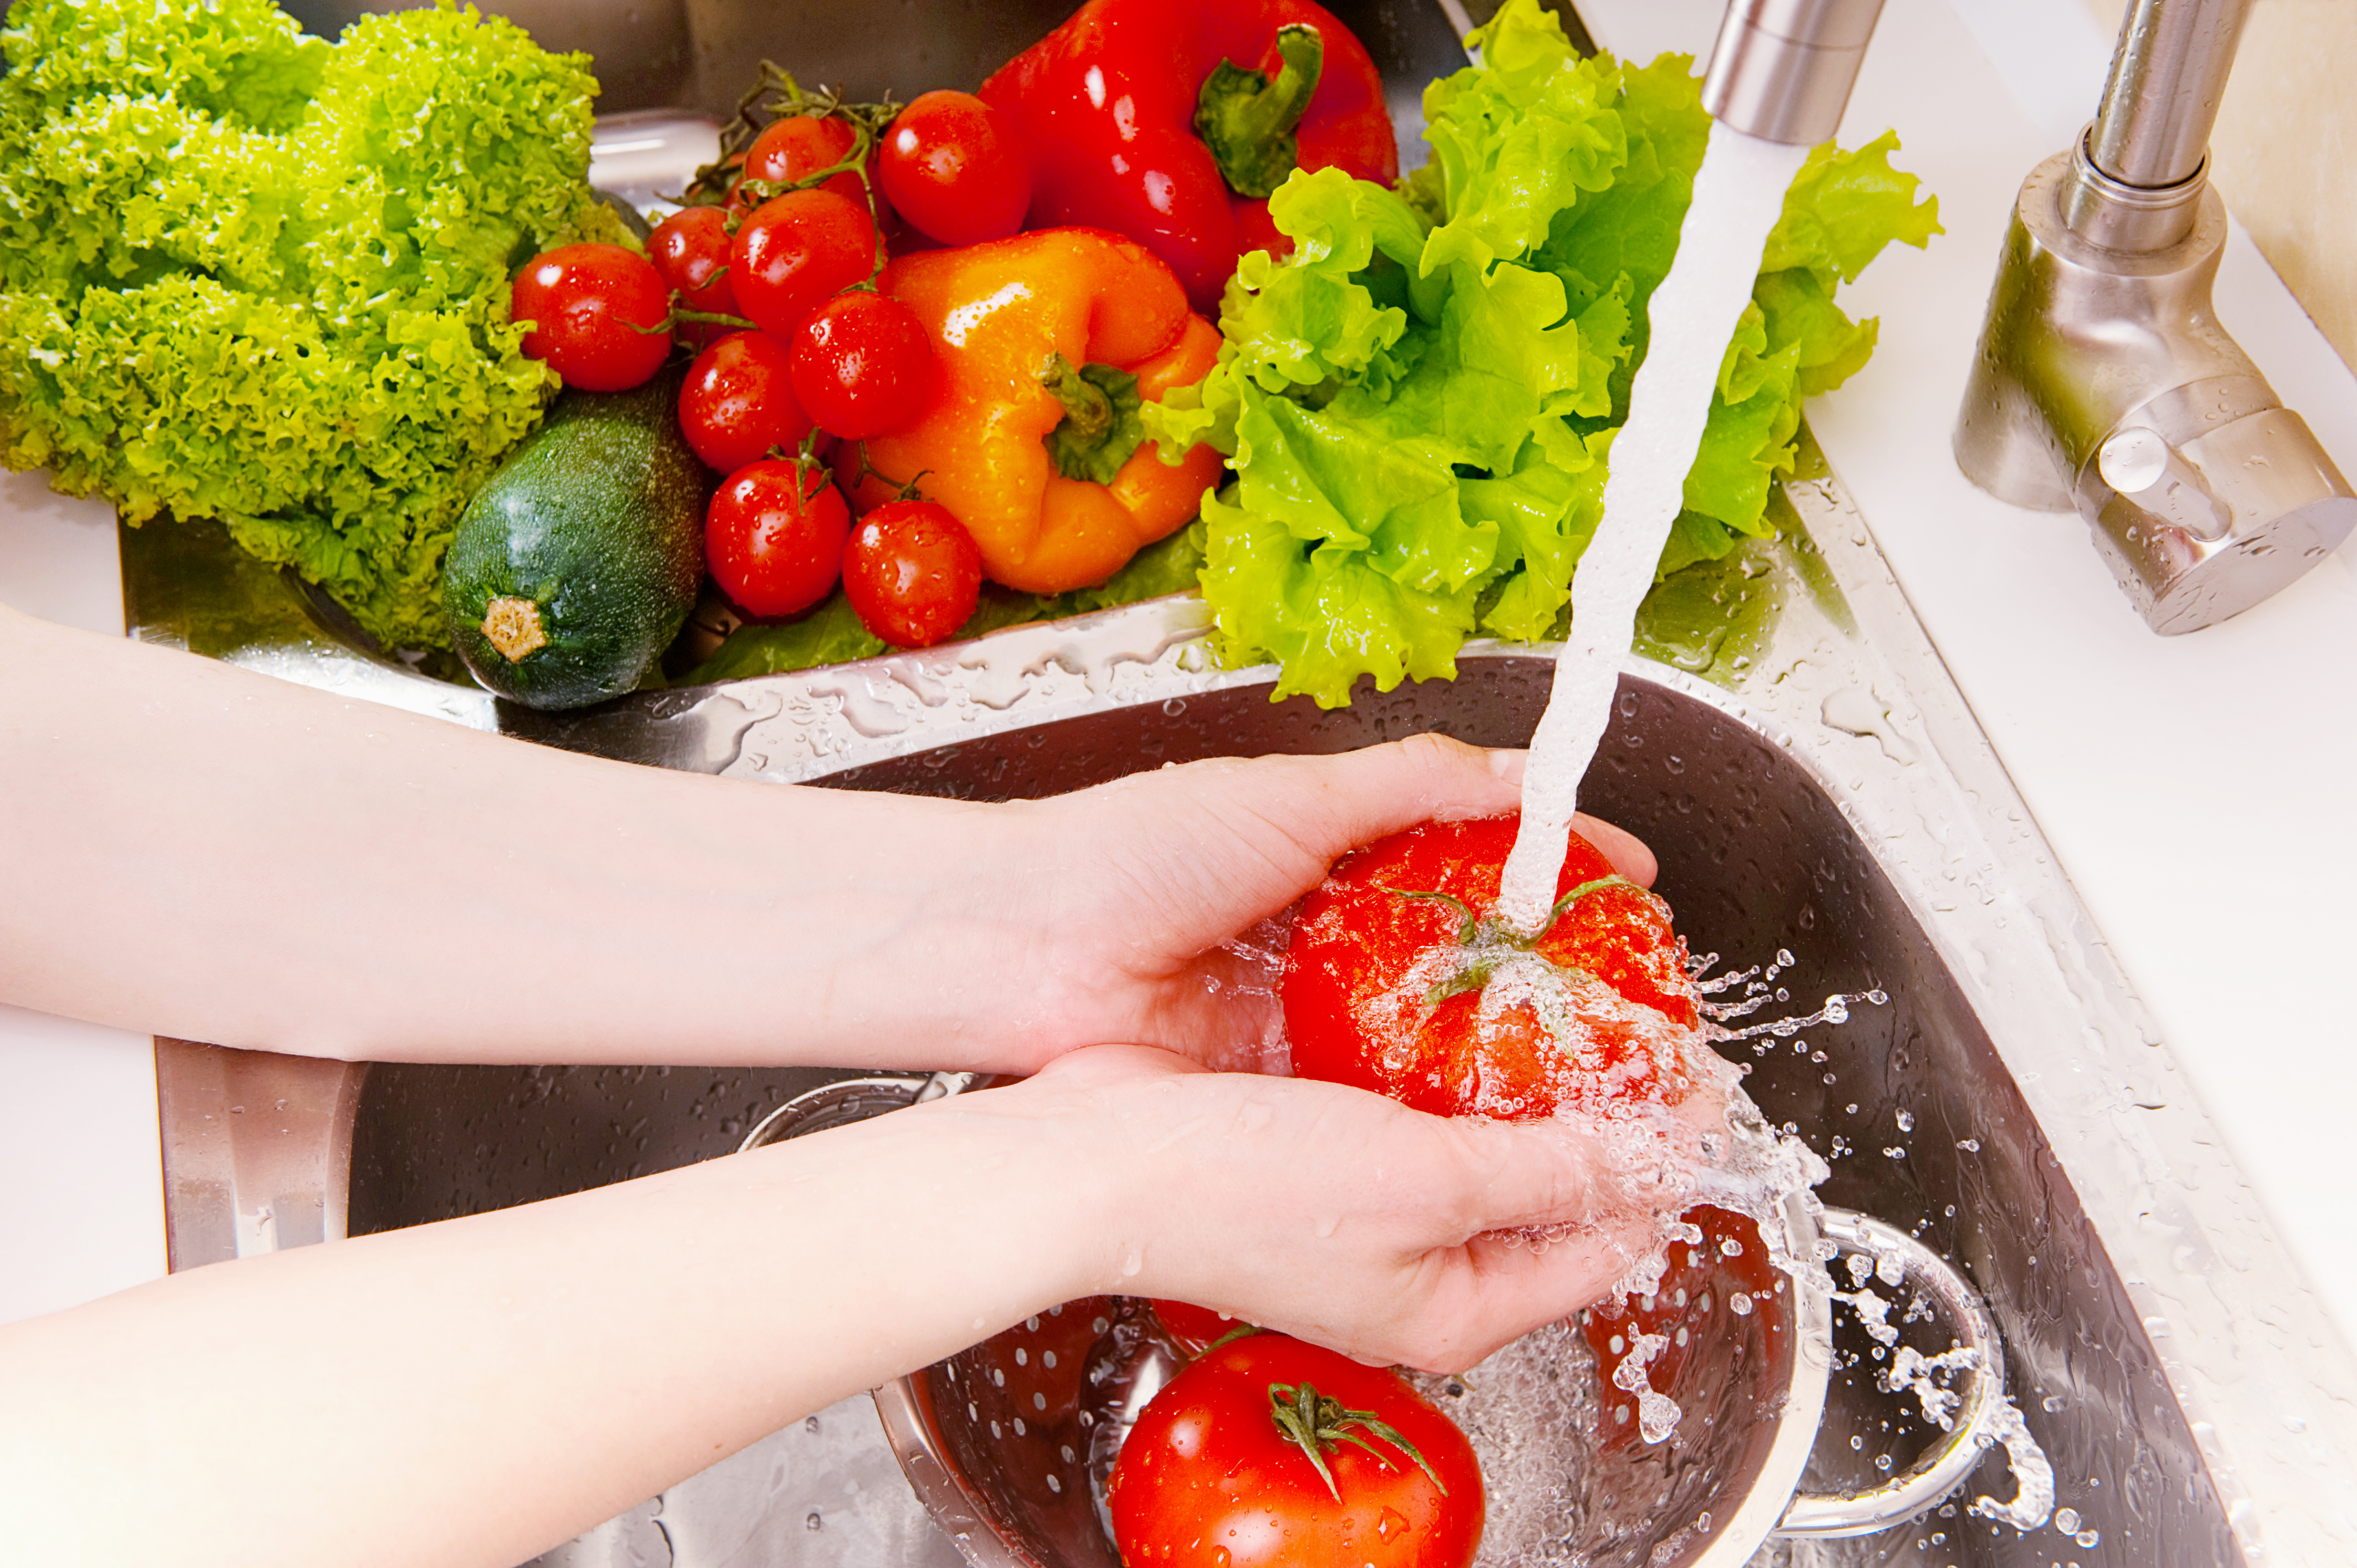 A pair of hands holds a tomato under running water, with lettuce, cucumber, peppers and cherry tomatoes piled on the counter next to the sink.